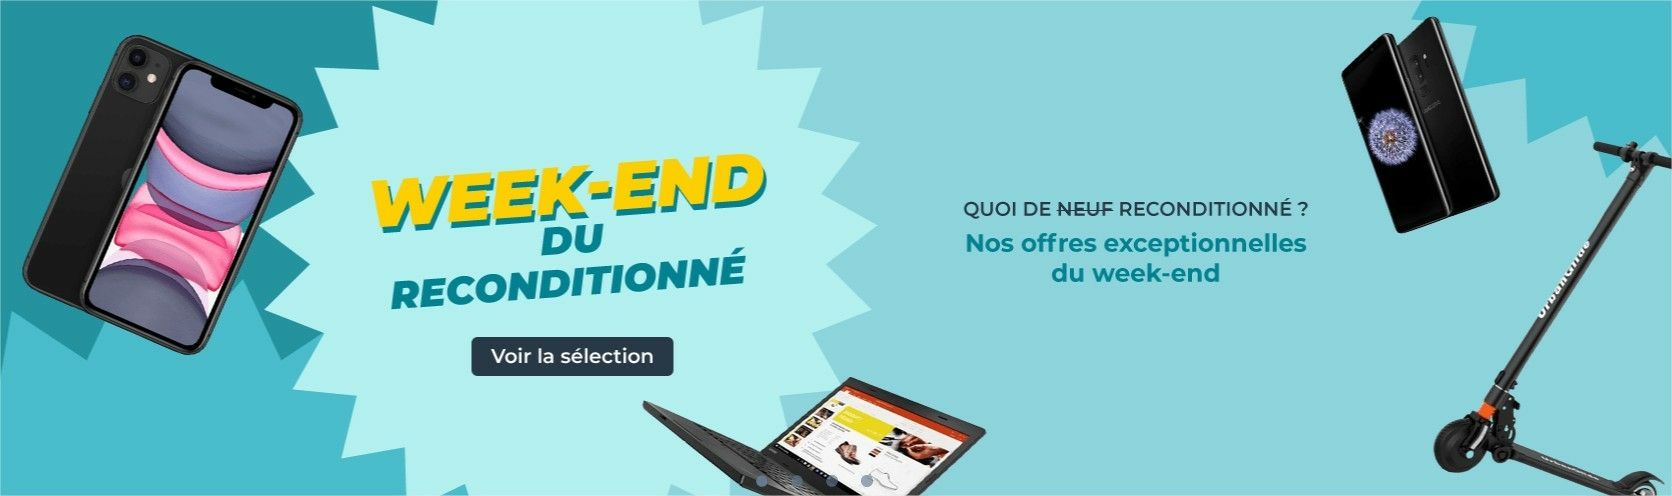 cdiscount week end reconditionné